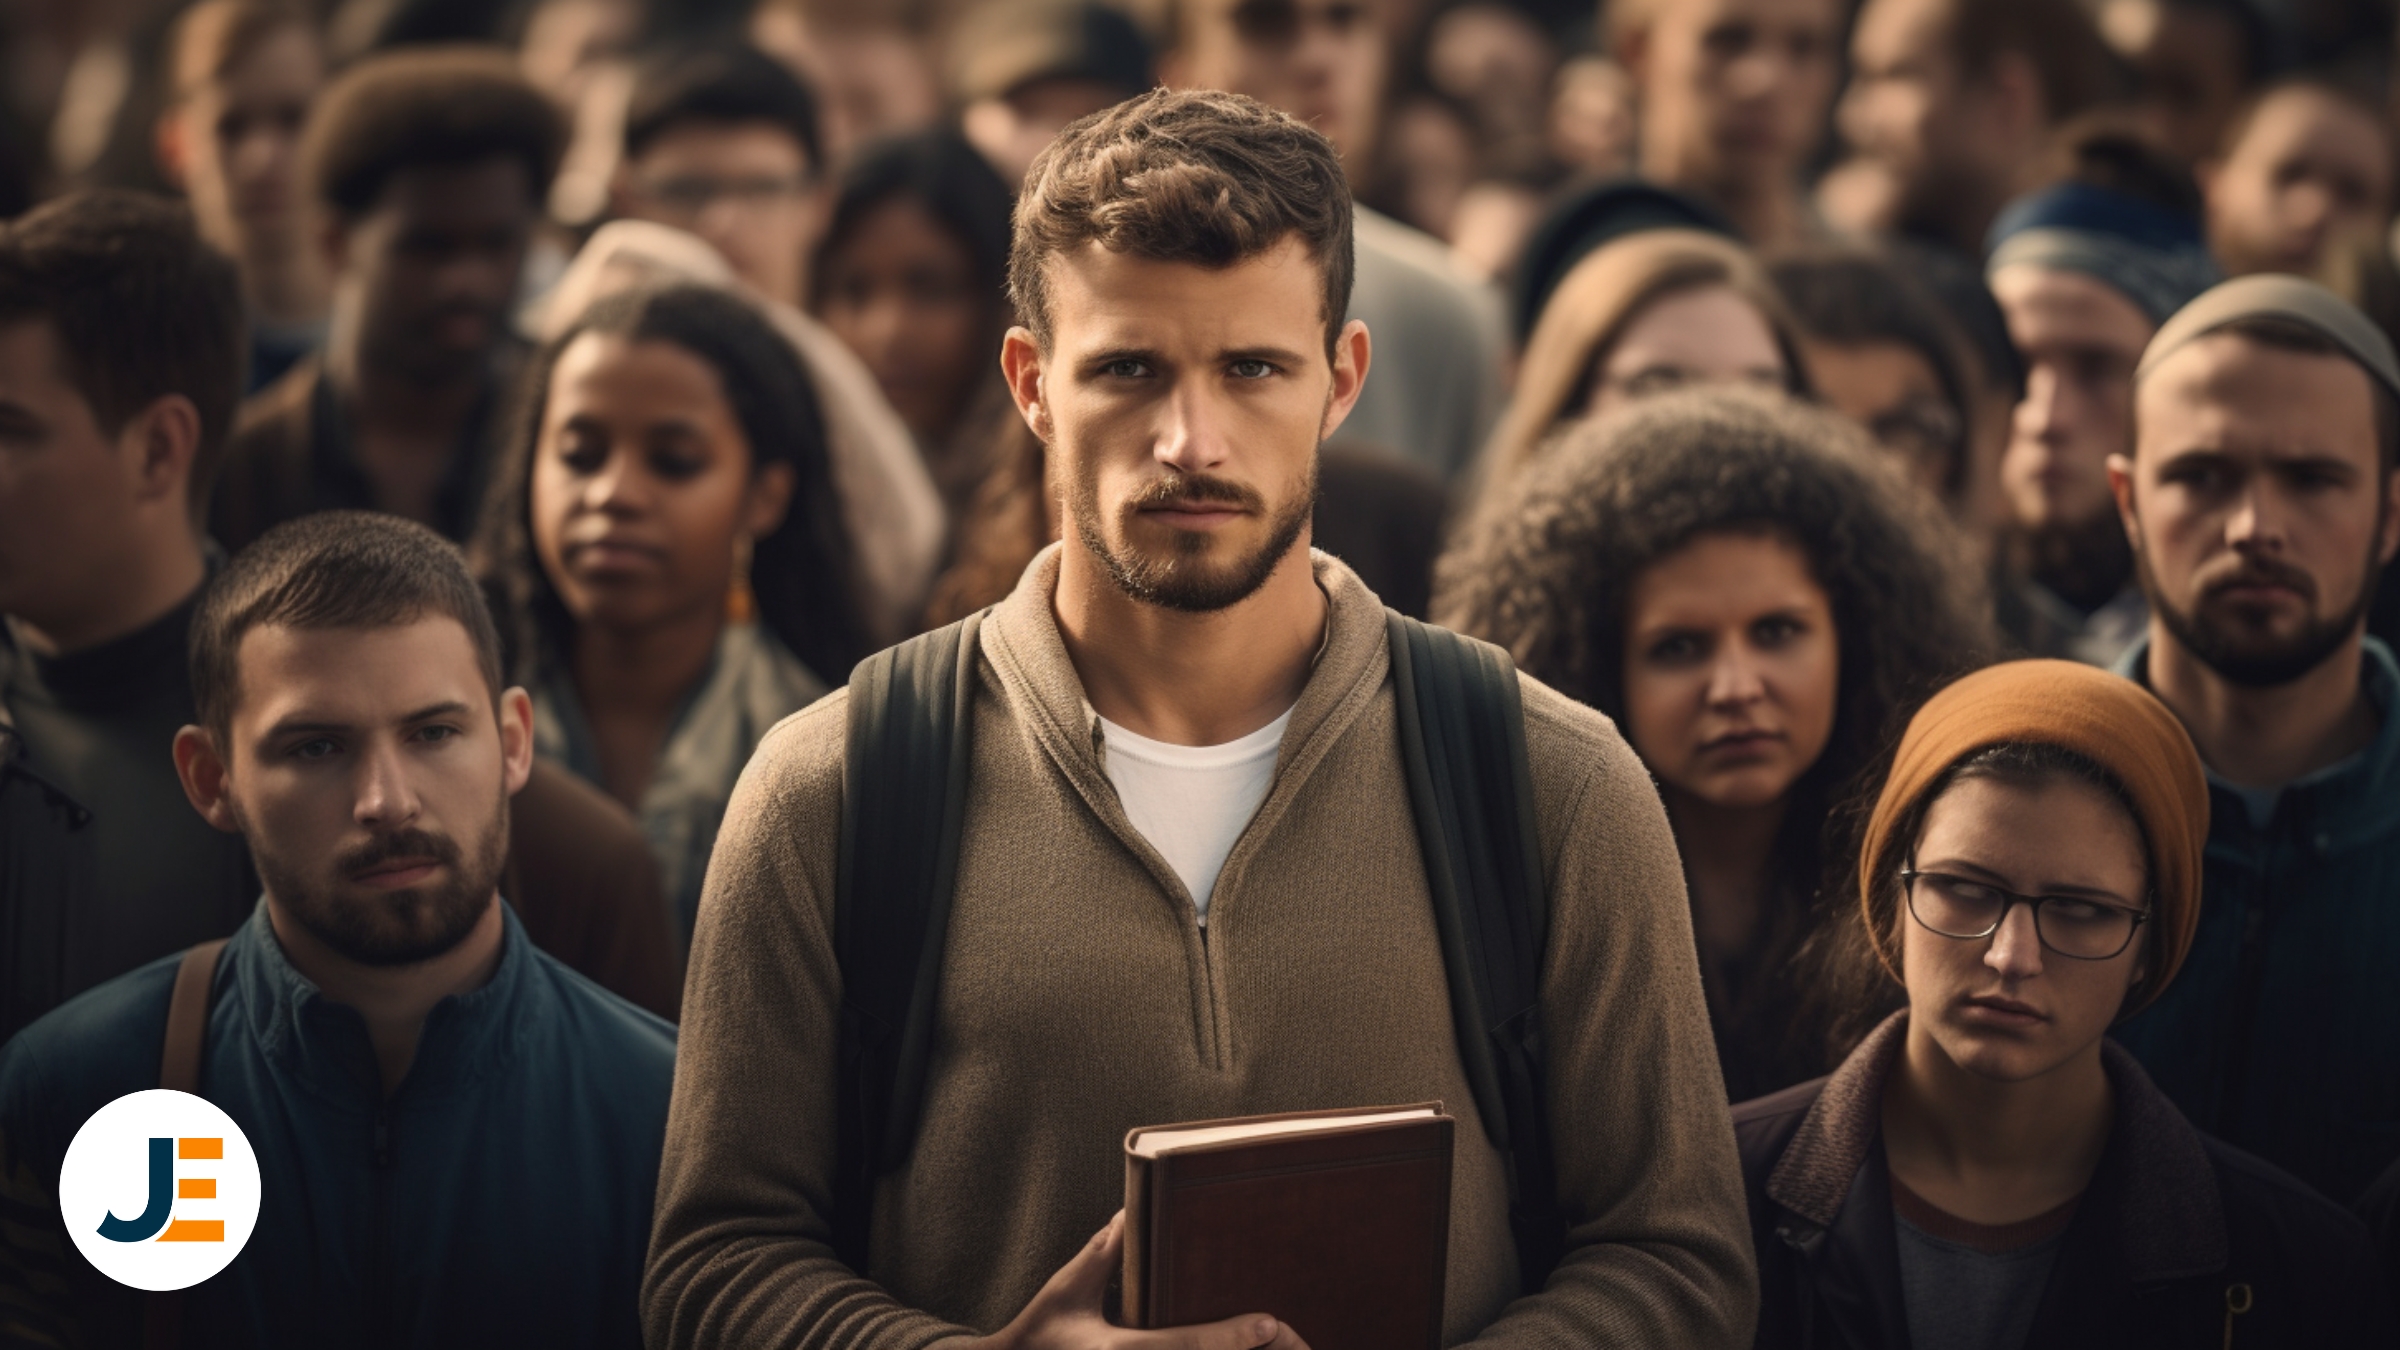 an american man holding a closed bible standing in a crowd of people, the man is looking at the camera with a somber look on his face